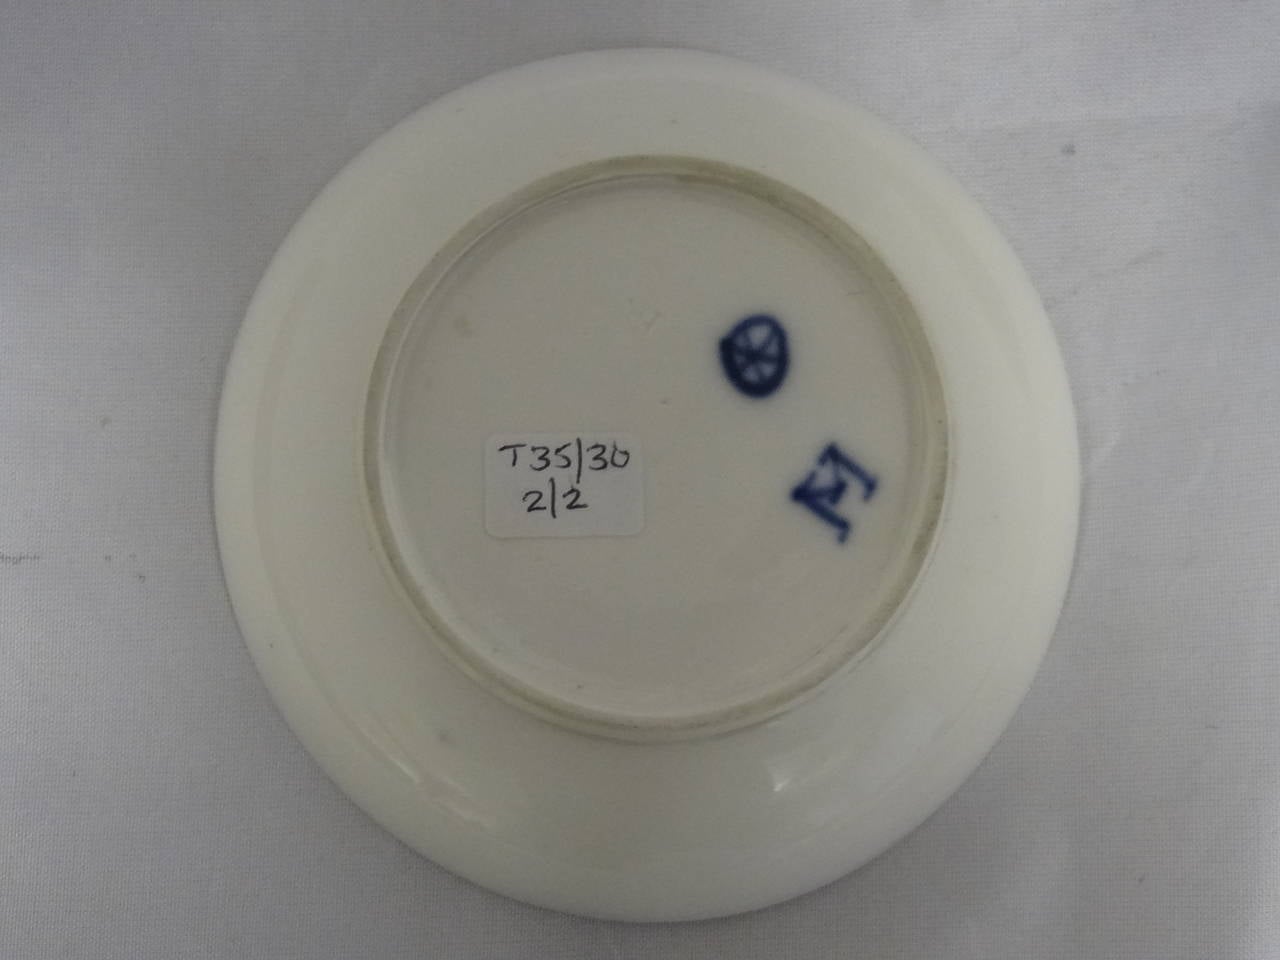 A Höchst Cup and Saucer decorated in underglaze blue.

Cup      h 4.8 cm x d   7.7 cm
Saucer h 2.8 cm x d 11.2 cm

Marked / Inscribed
Höchst 'Wheel' Mark denoting manufacture between 1763 - 1796.

Provenance
Previously sold at Sotheby's